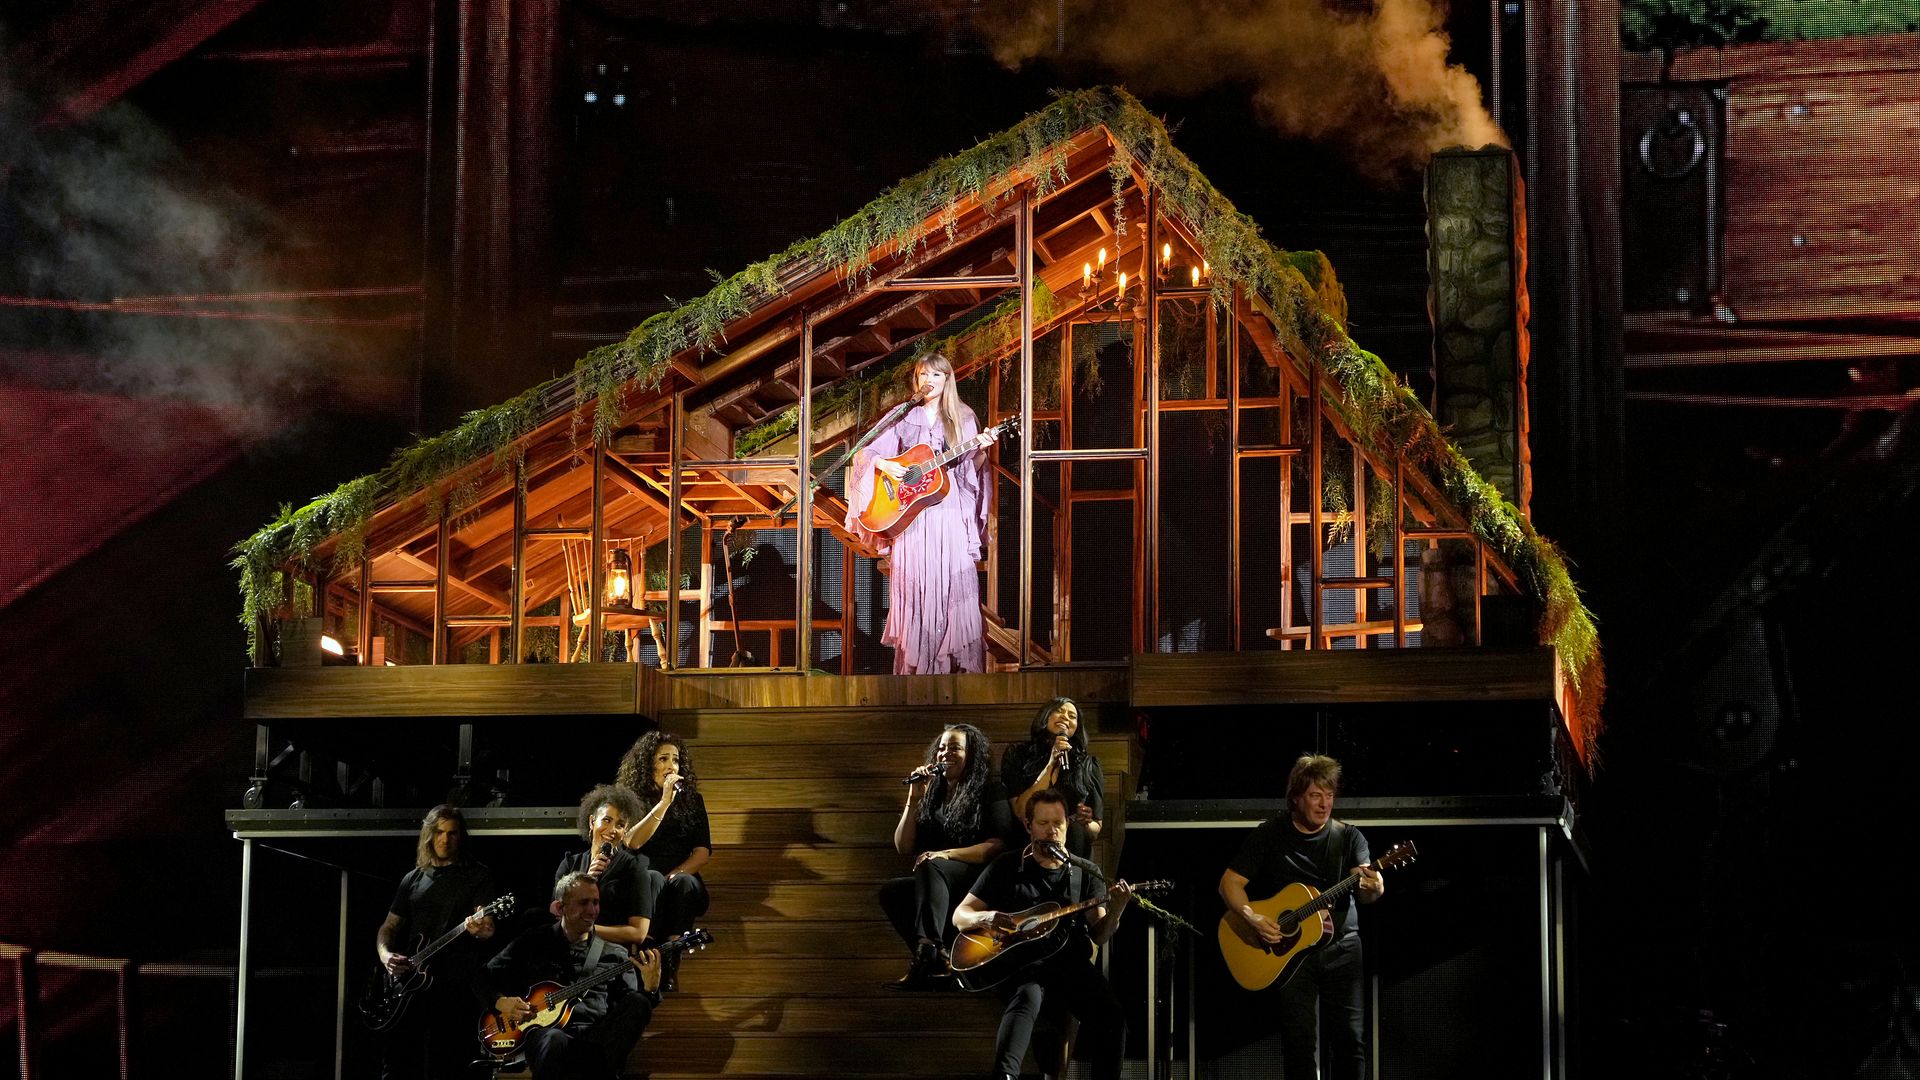 Taylor Swift singing on stage with a guitar surrounded by the set of an overgrown house